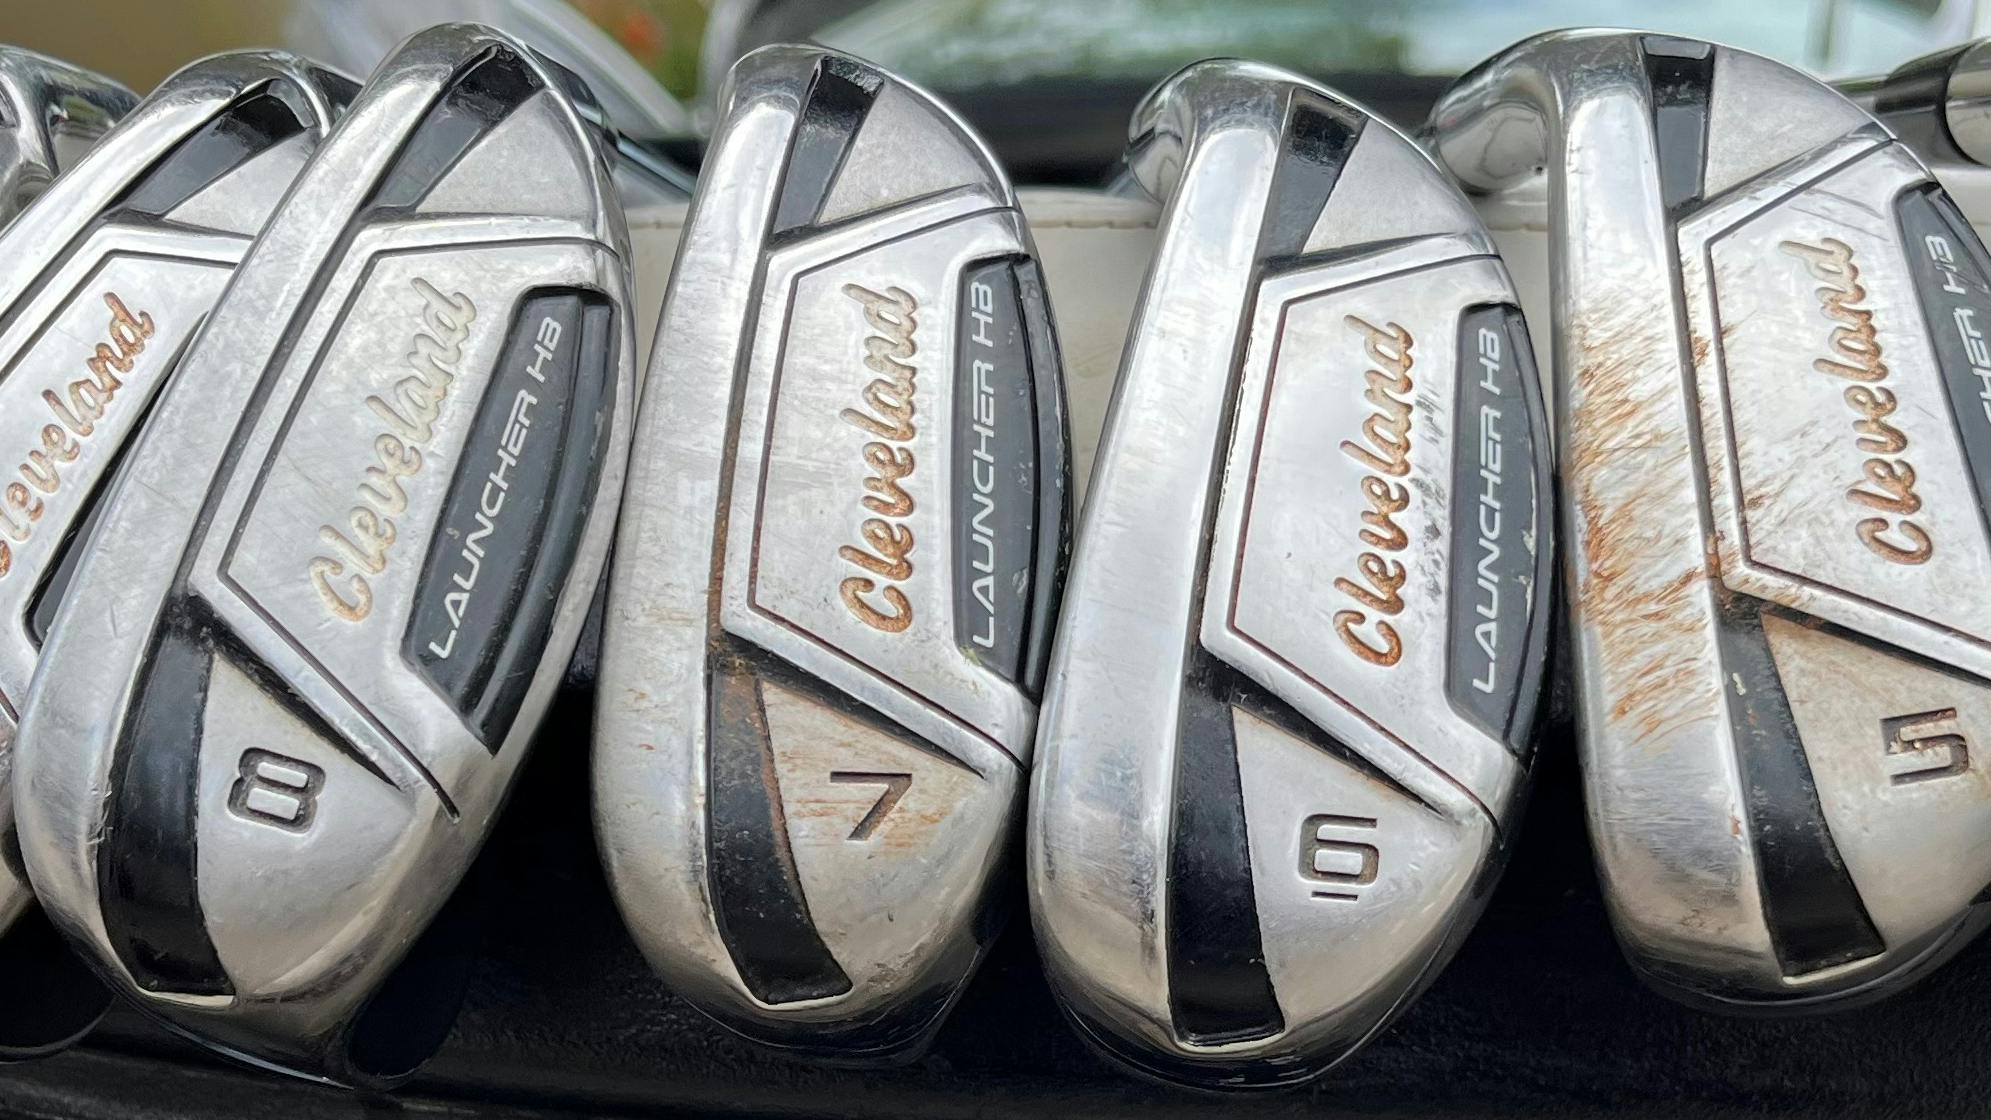 The Cleveland Golf Launcher HB Turbo Iron Set laying next to each other after a round at Mililani GC (Oahu, HI).